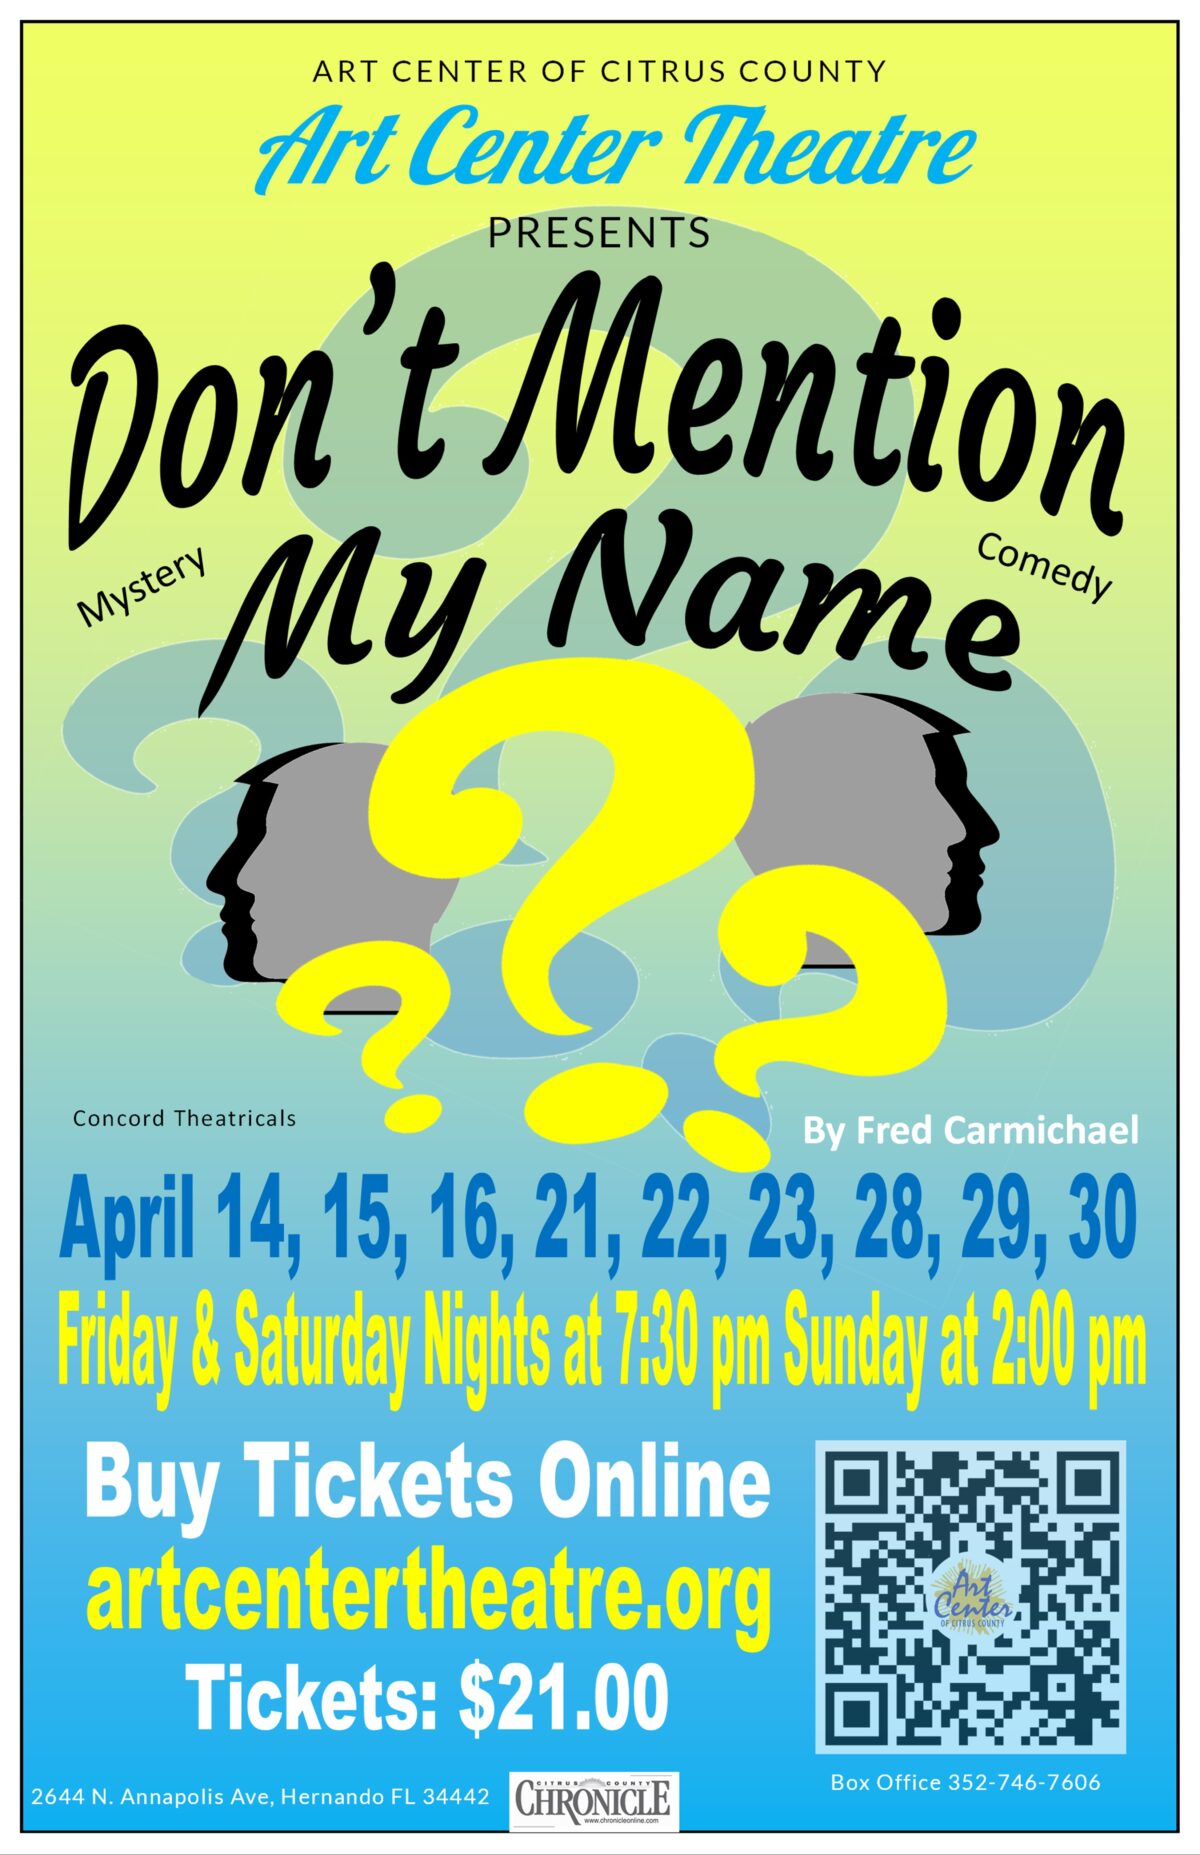 Tickets On Sale Now: Don’t Mention My Name